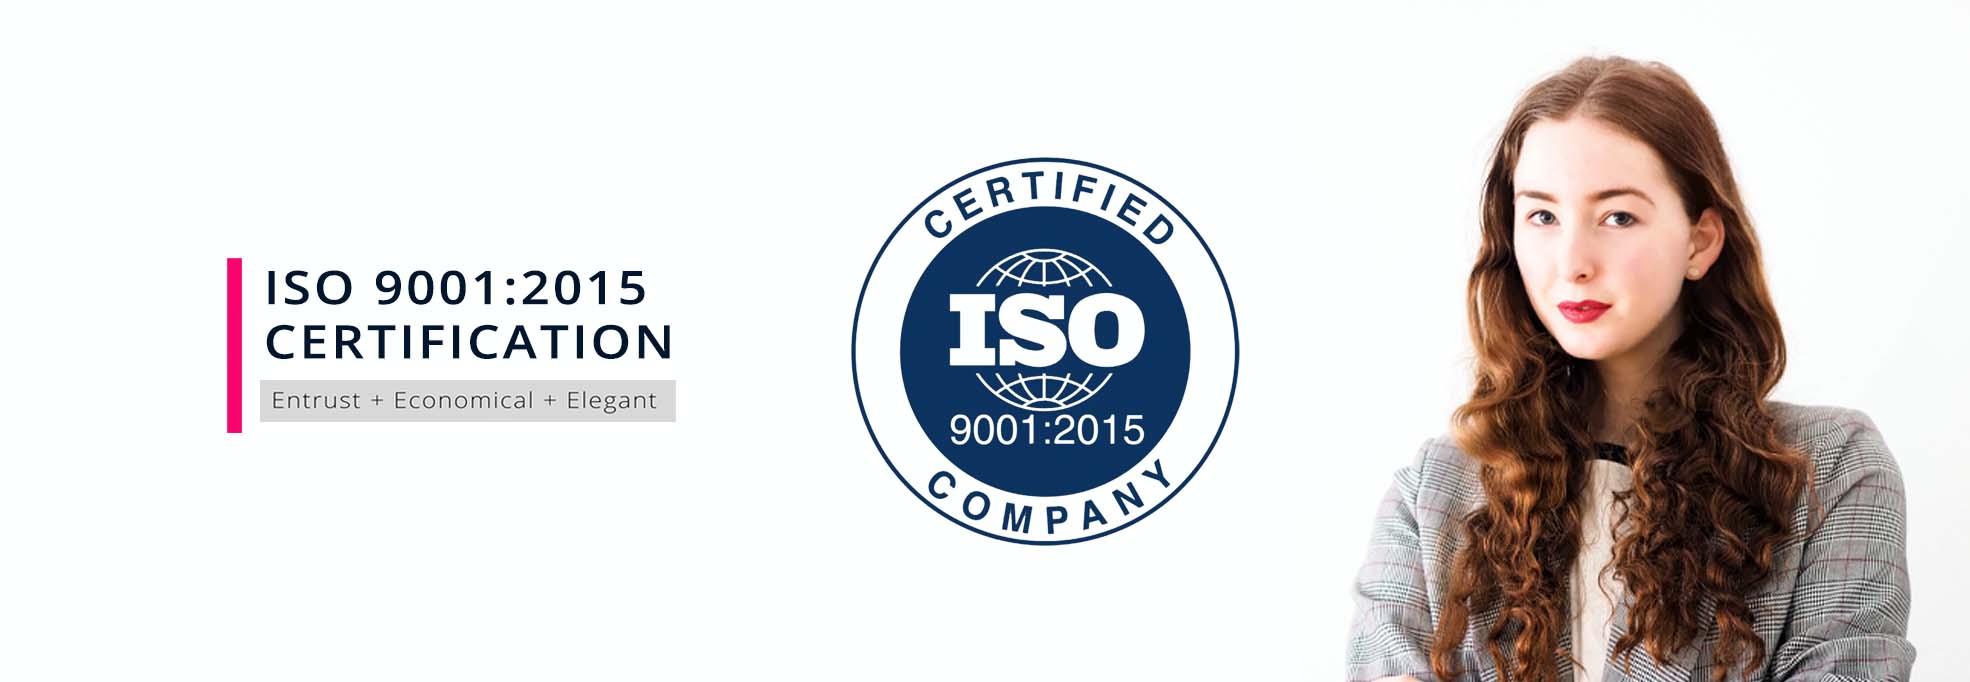 ISO 9001.2015 Certification